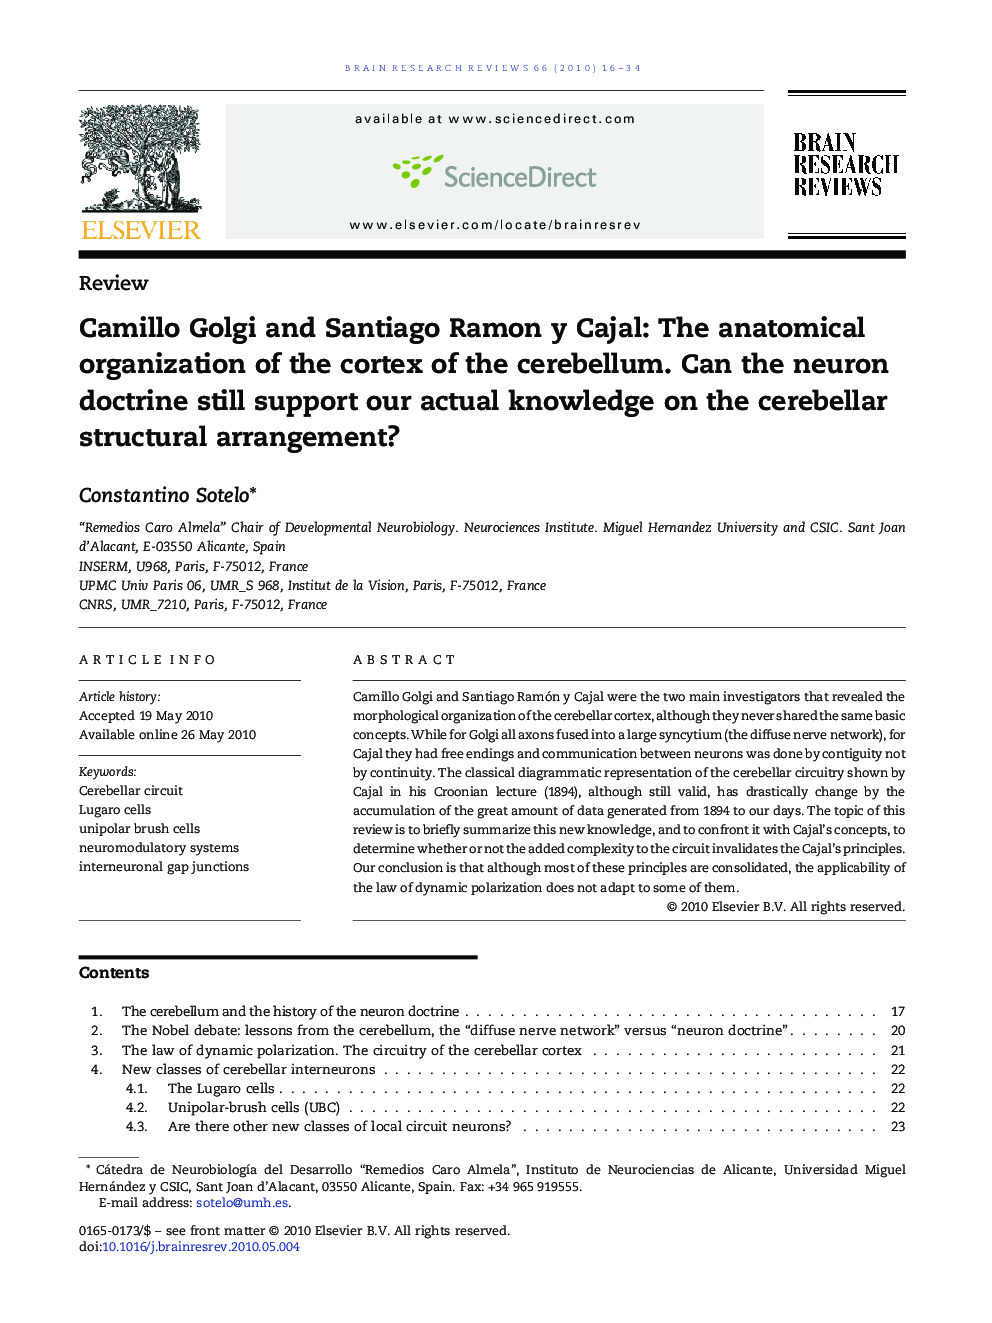 Camillo Golgi and Santiago Ramon y Cajal: The anatomical organization of the cortex of the cerebellum. Can the neuron doctrine still support our actual knowledge on the cerebellar structural arrangement?